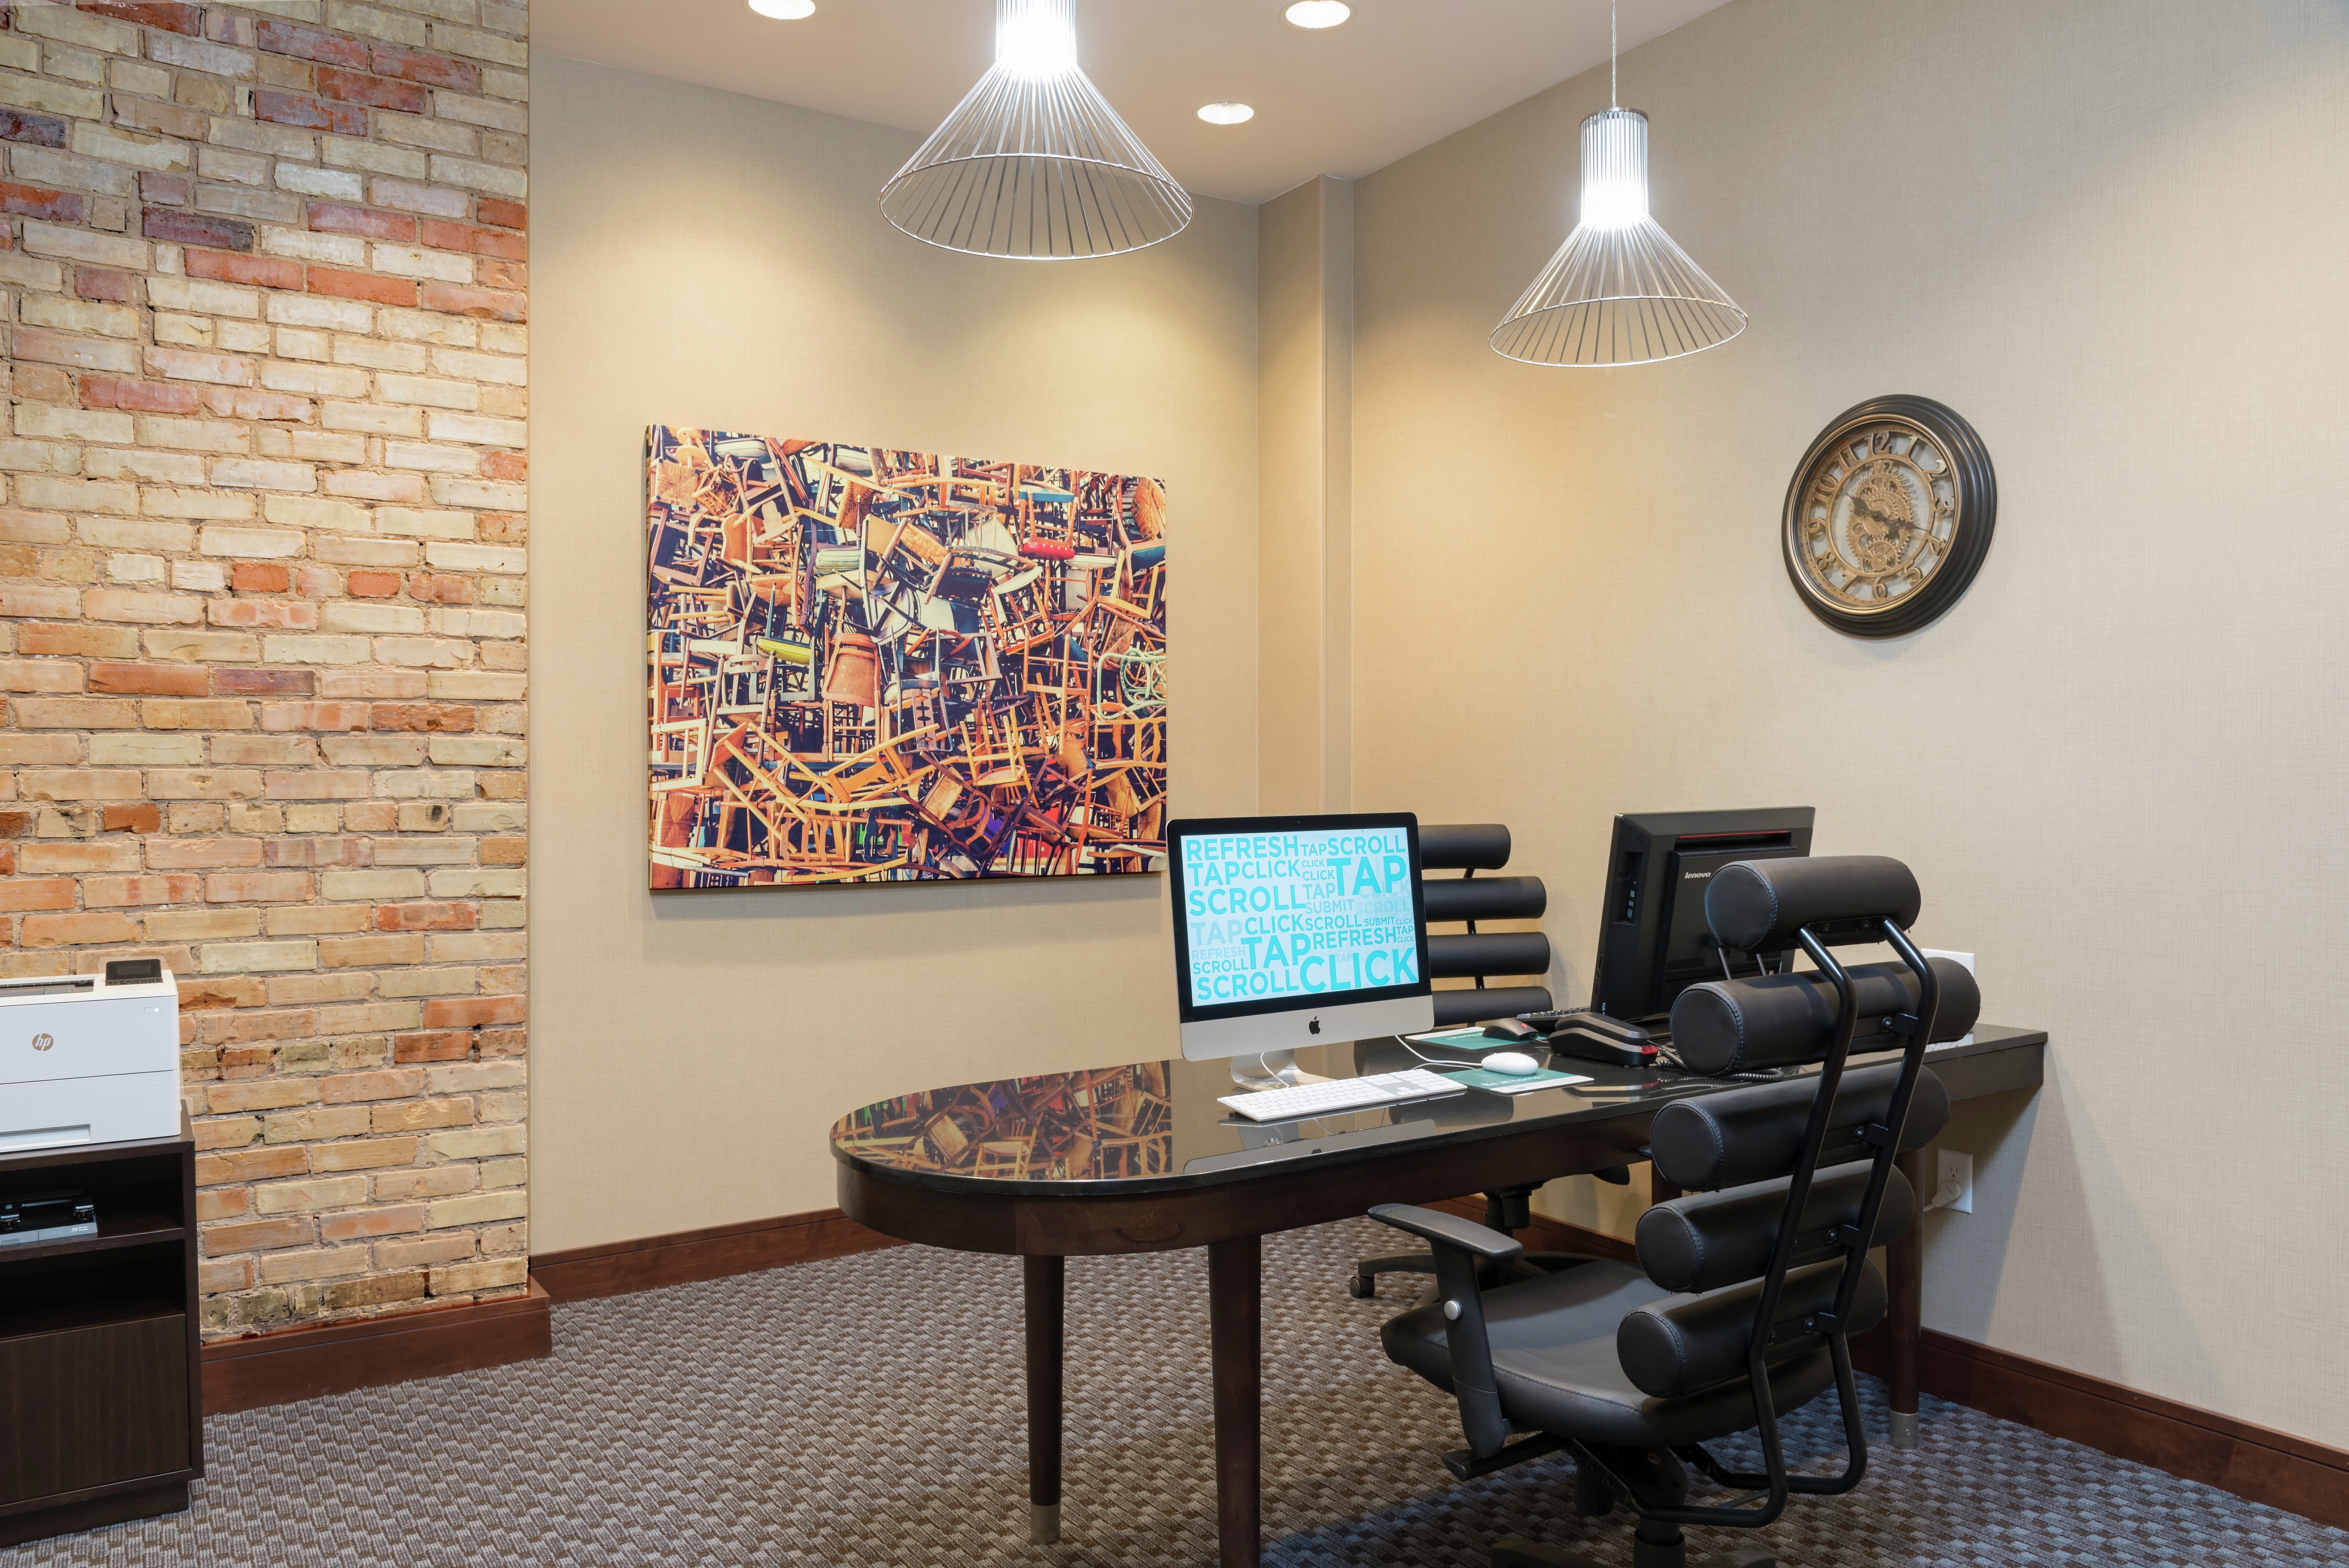 Business Center With Printer/Fax/Copier, Wall Art, Wall Clock, Two Computer on Desk, and Two Chairs